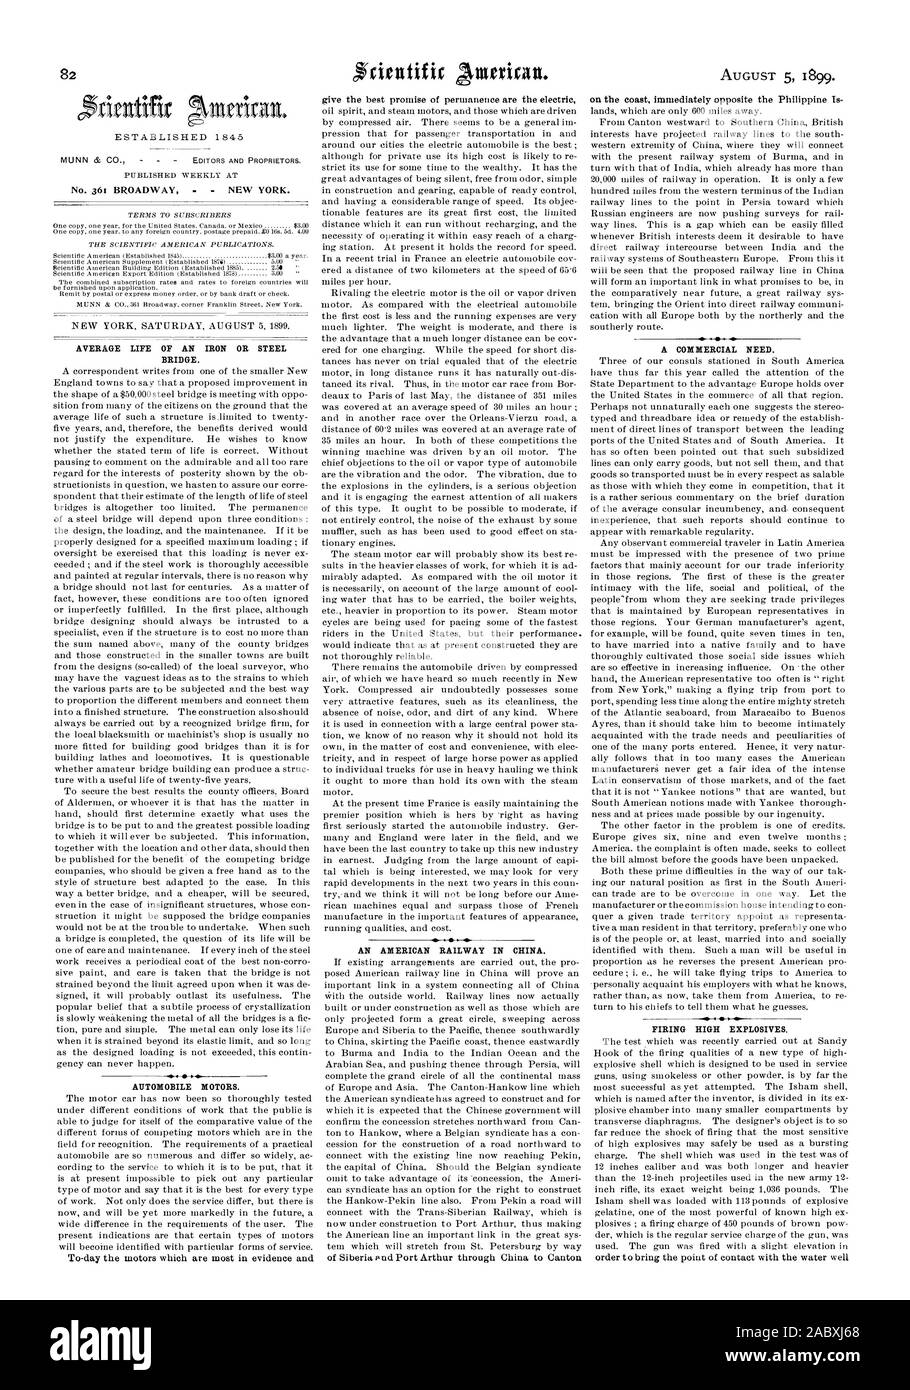 NEW YORK SAT UR DAY AUGUST 5 1899. AVERAGE LIFE OF AN IRON OR STEEL BRIDGE. AUTOMOBILE MOTORS. To-day the motors which are most in evidence and give the best promise of permanence are the electric AN AMERICAN RAILWAY IN CHINA. on the coast immediately opposite the Philippine Is A COMMERCIAL NEED. FIRING HIGH EXPLOSIVES., scientific american, 1899-08-05 Stock Photo